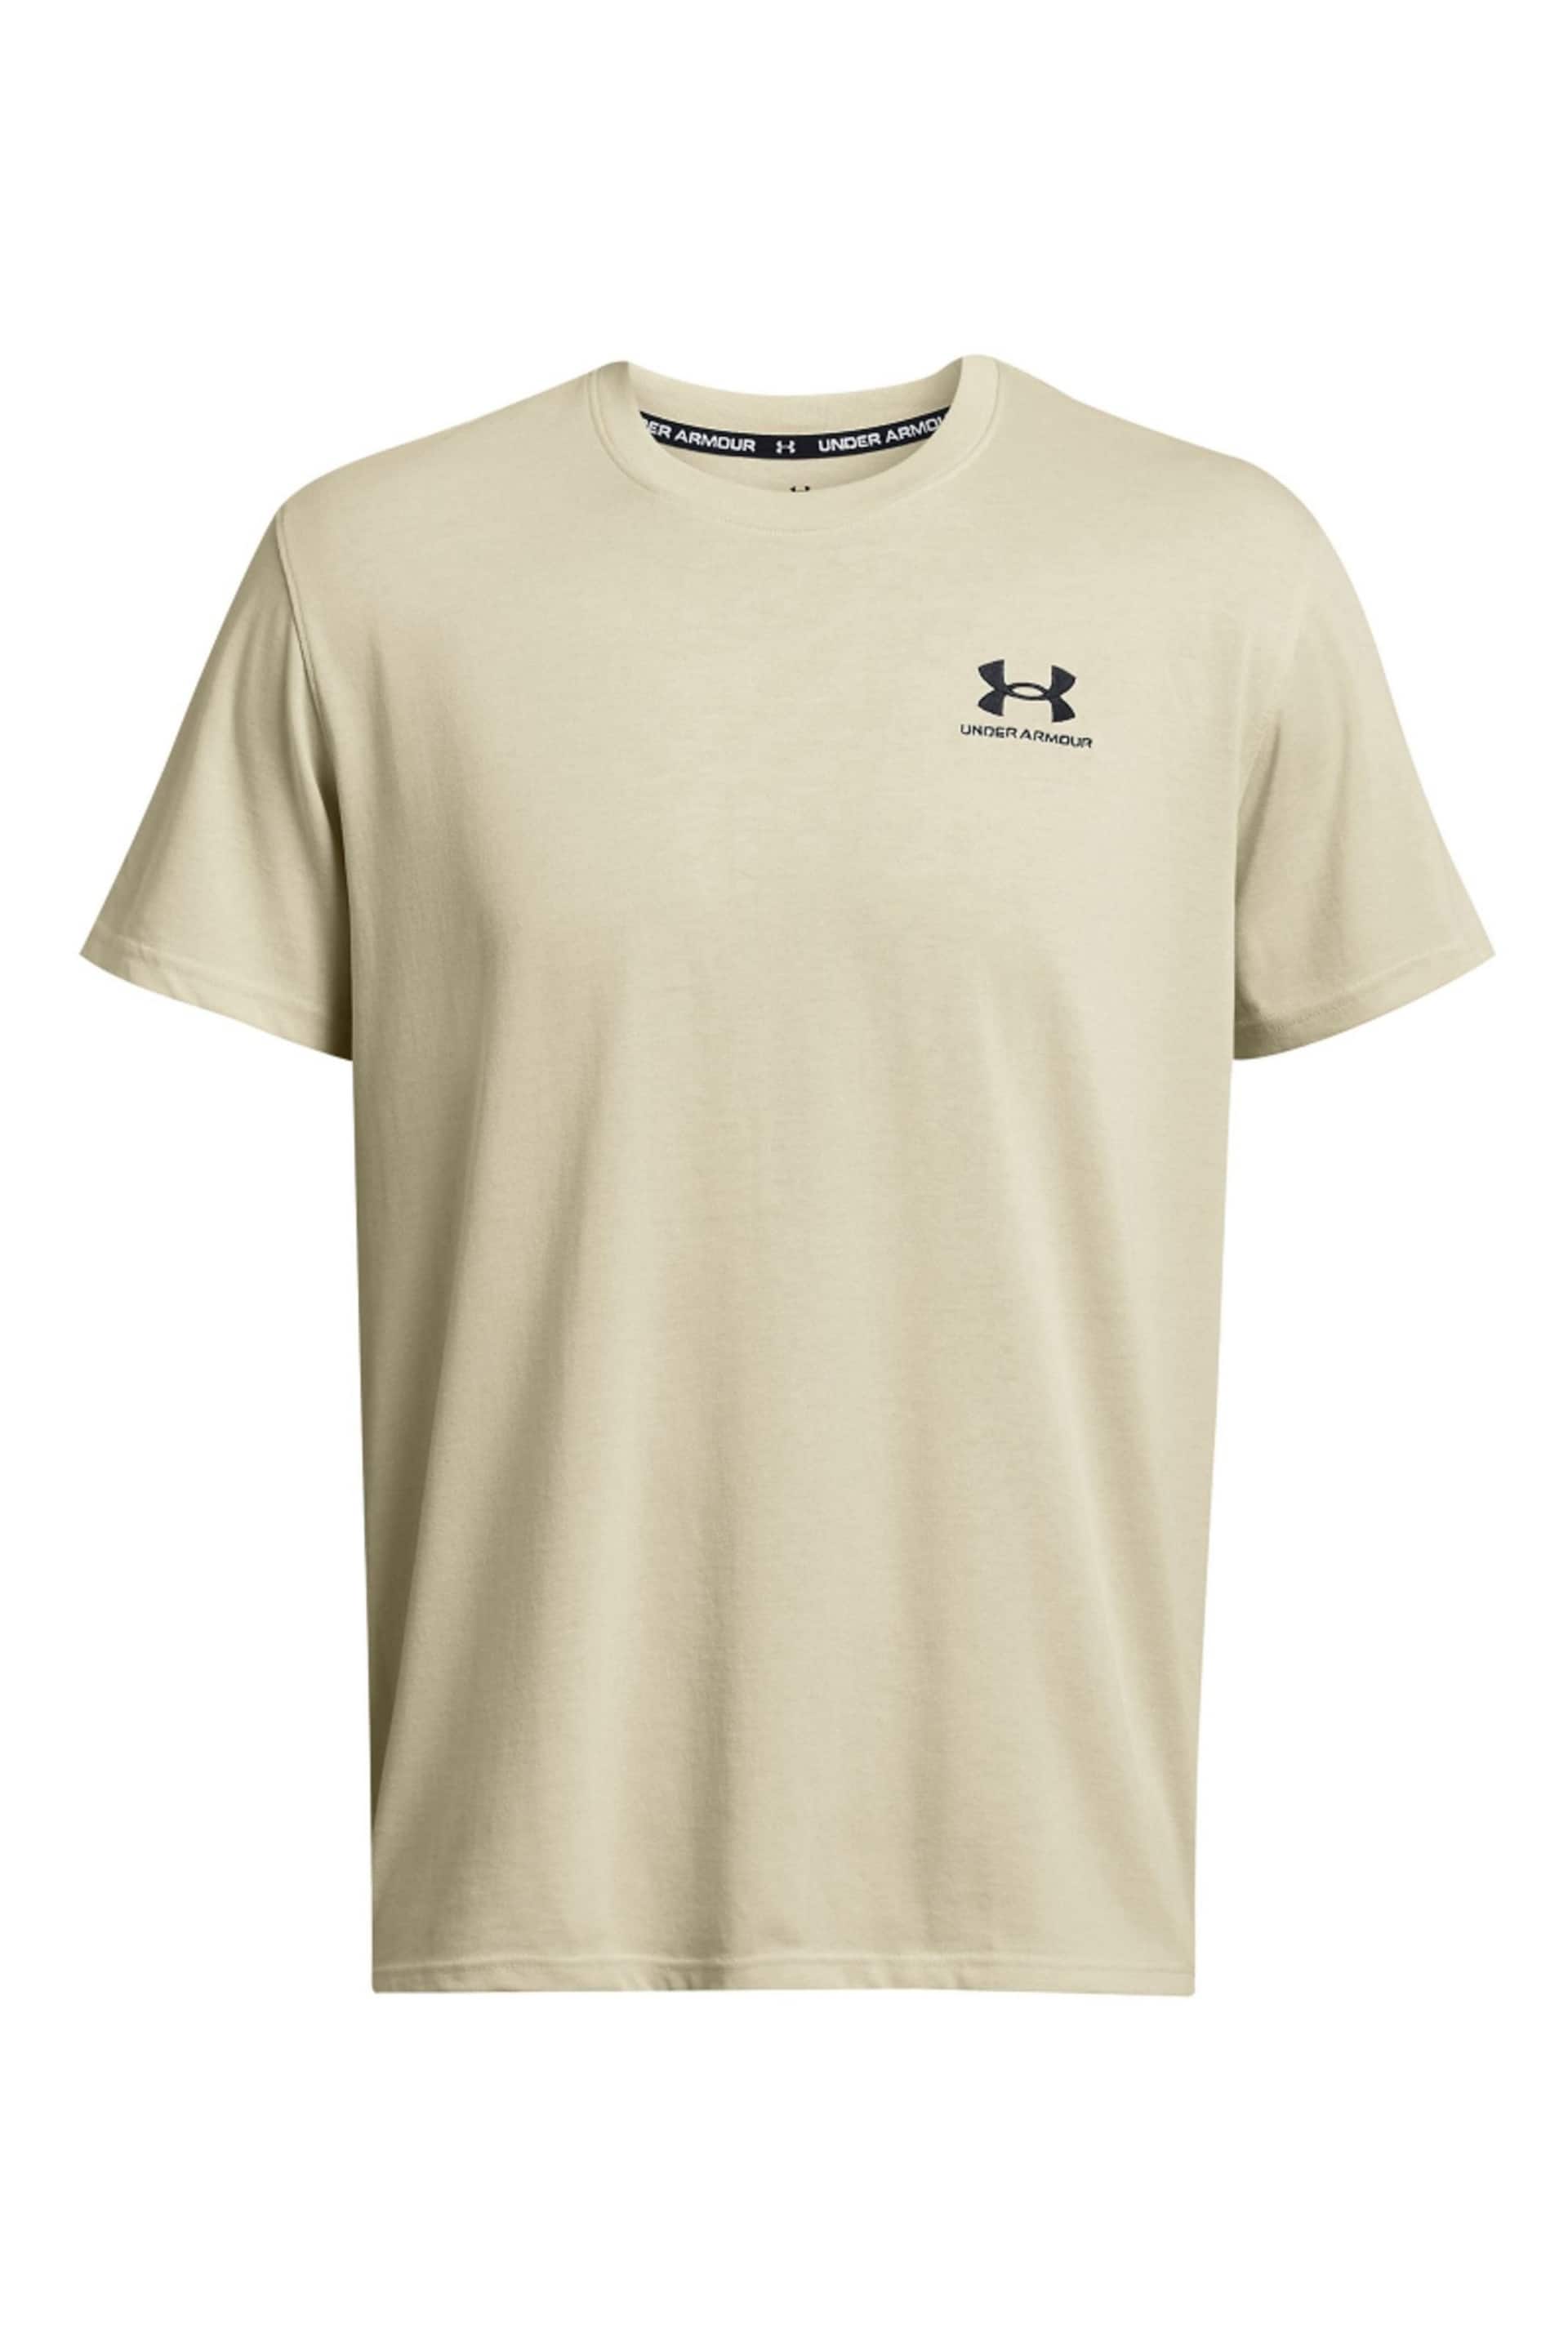 Under Armour Cream Under Armour Cream No Style Family Assigned T-Shirt - Image 2 of 3